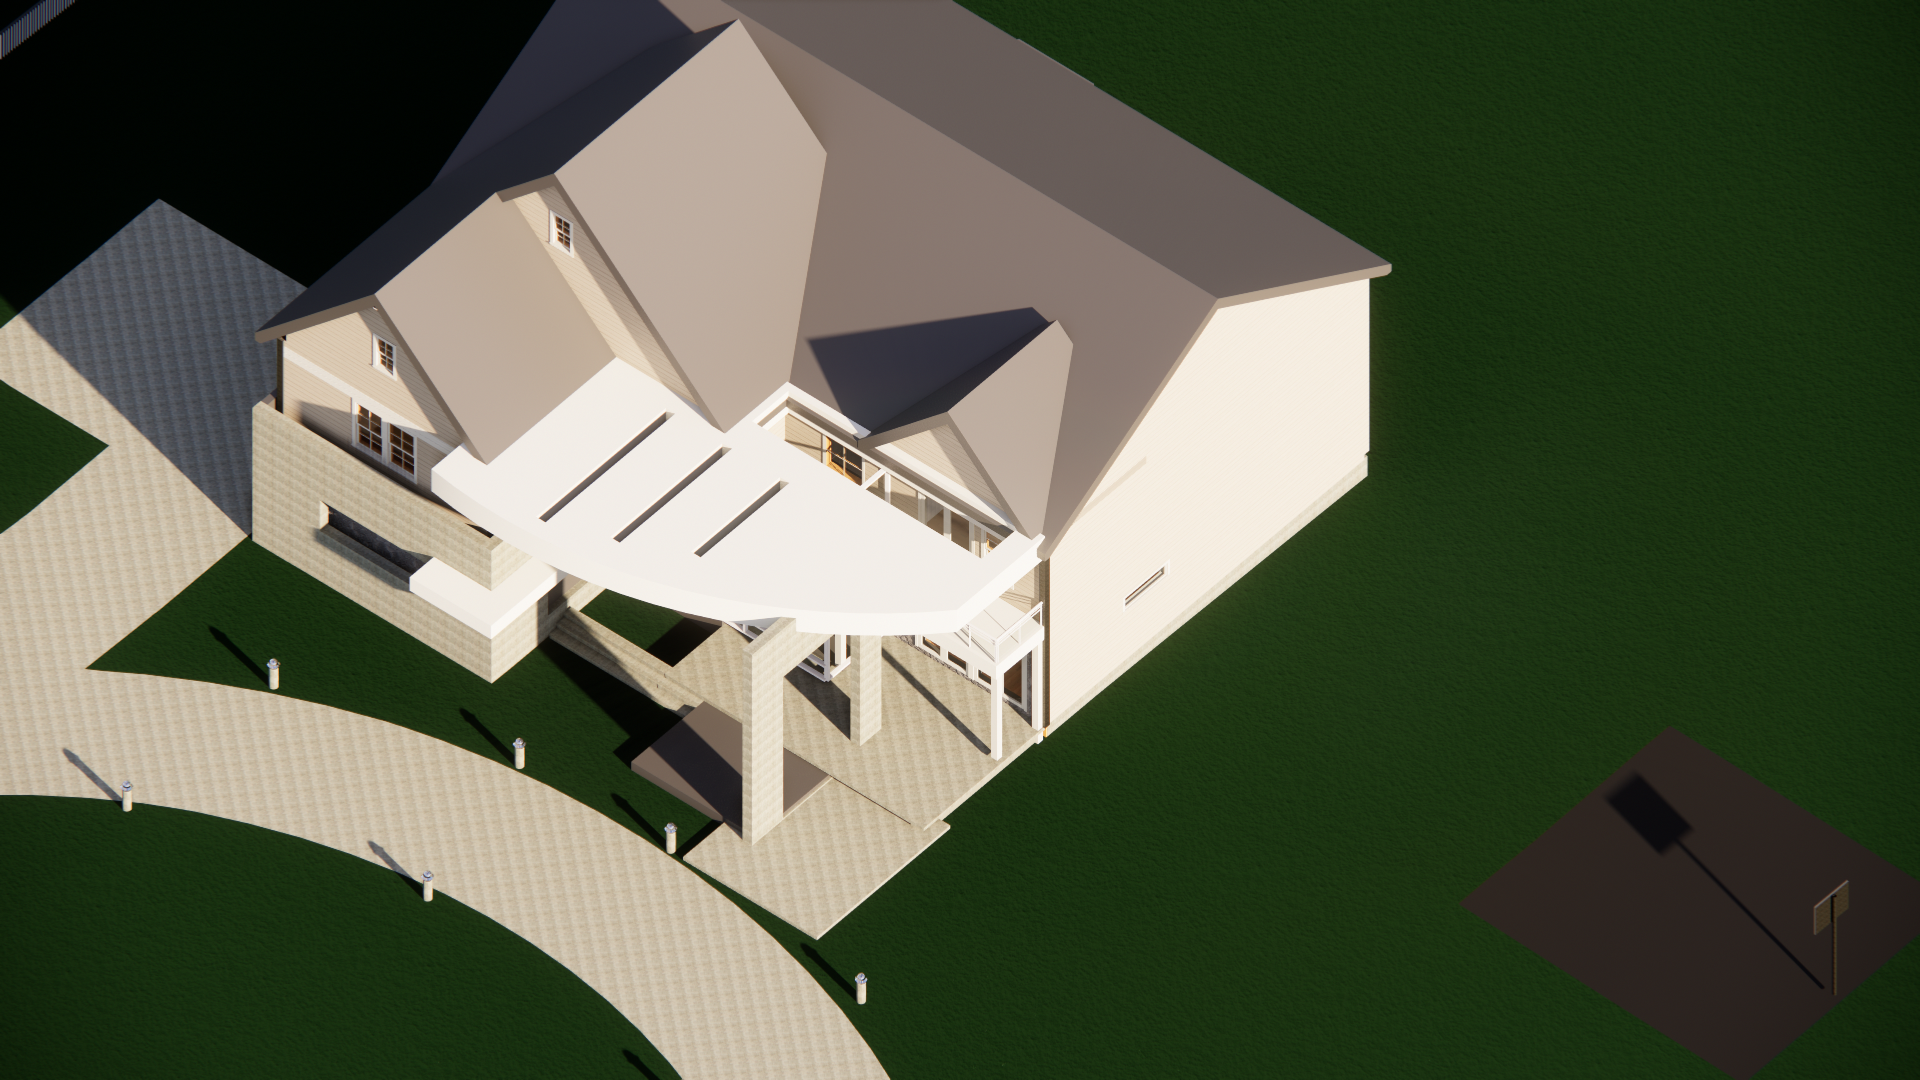 Rendered image of a house addition